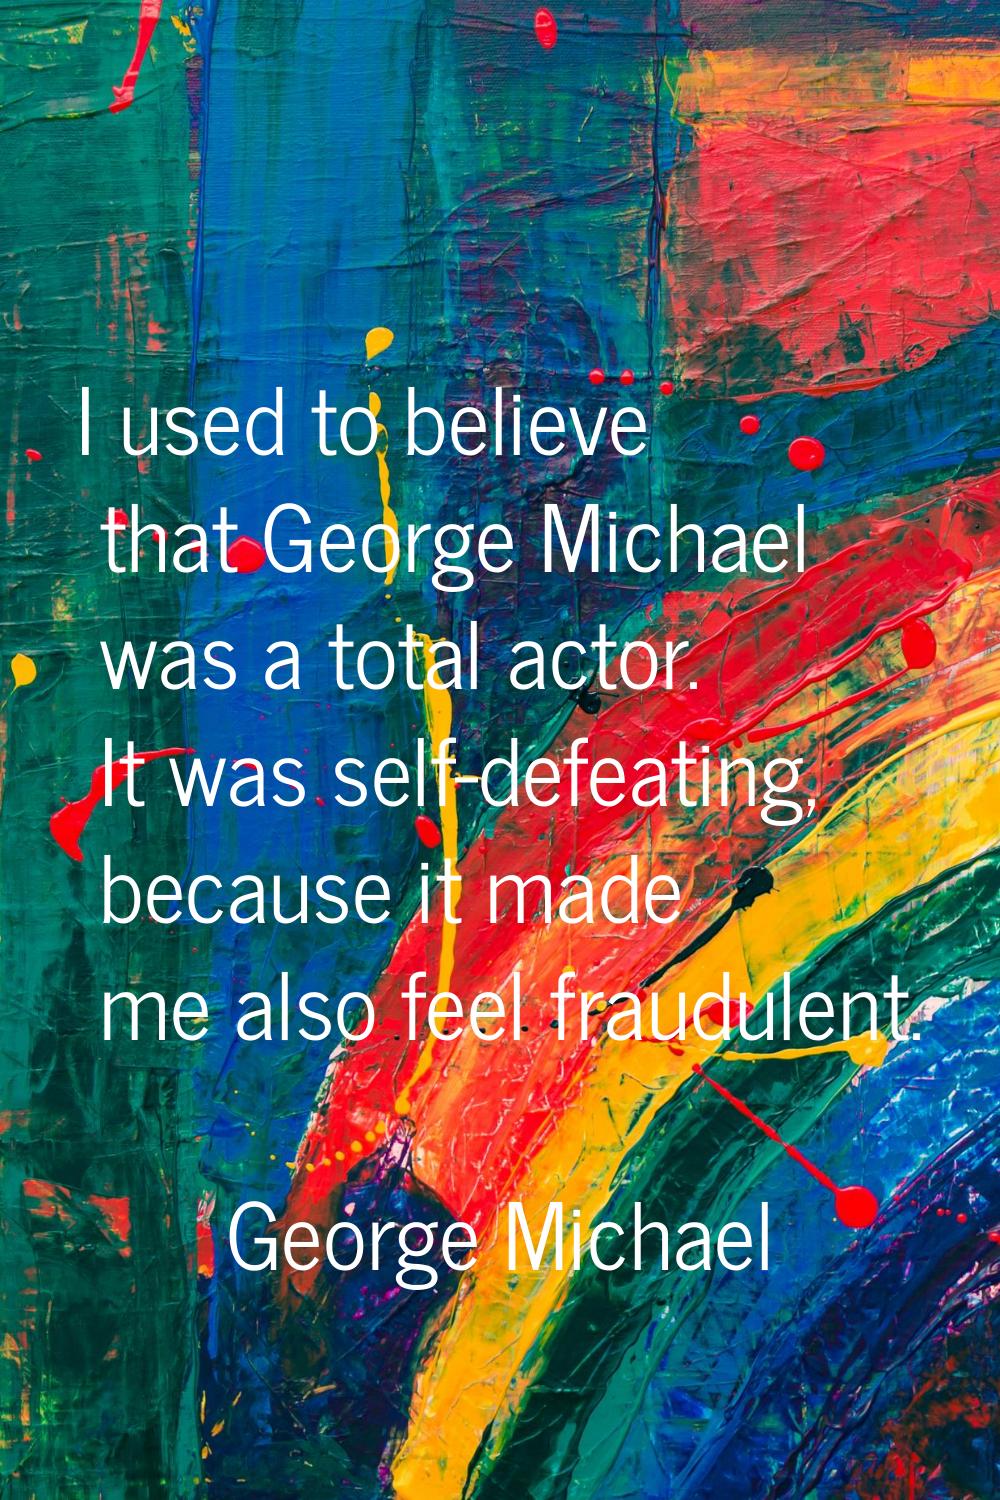 I used to believe that George Michael was a total actor. It was self-defeating, because it made me 